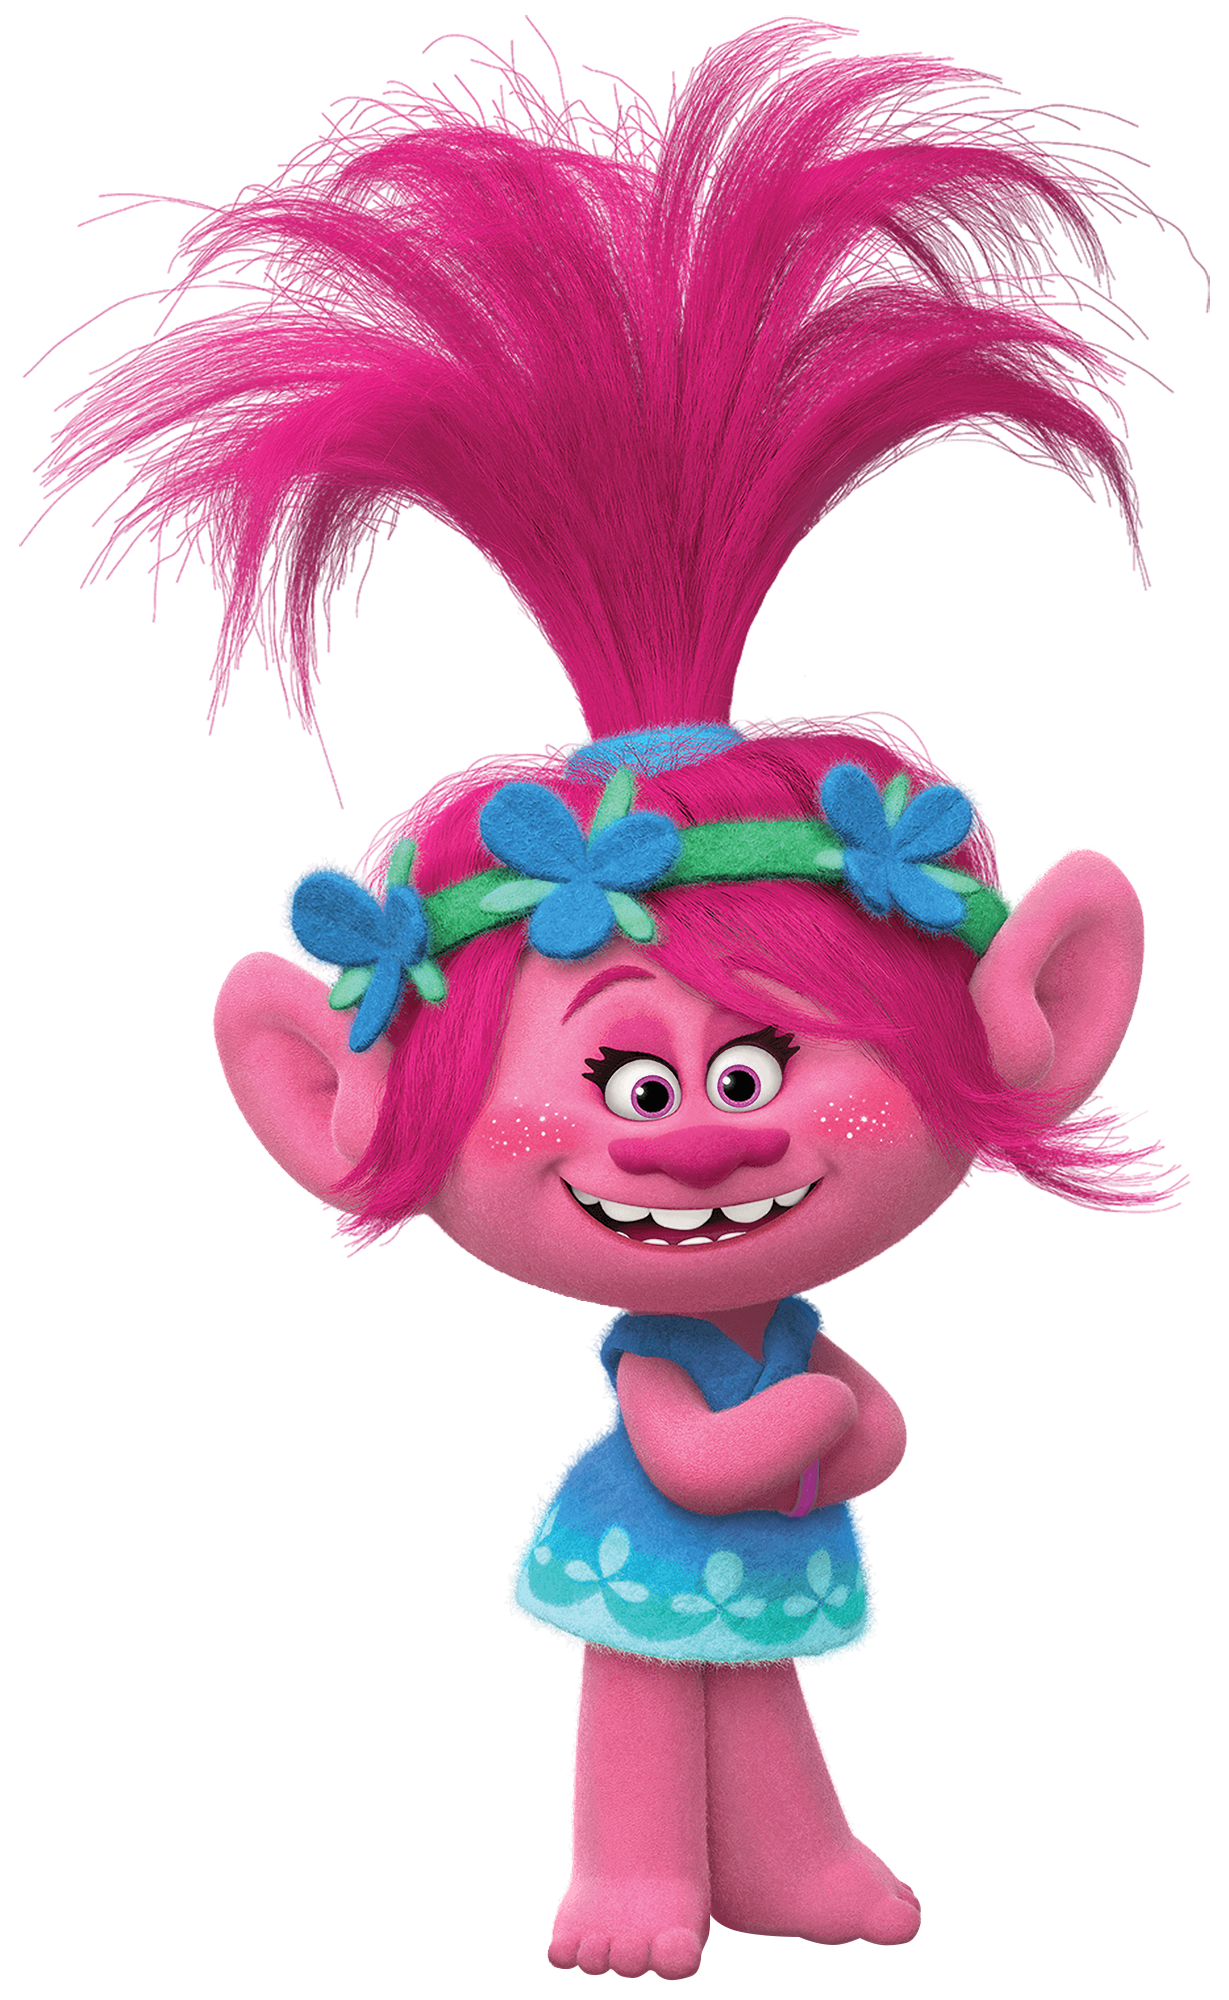 Poppy Trolls World Tour Transparent PNG Image​-Quality Free Image and Transparent PNG Clipart